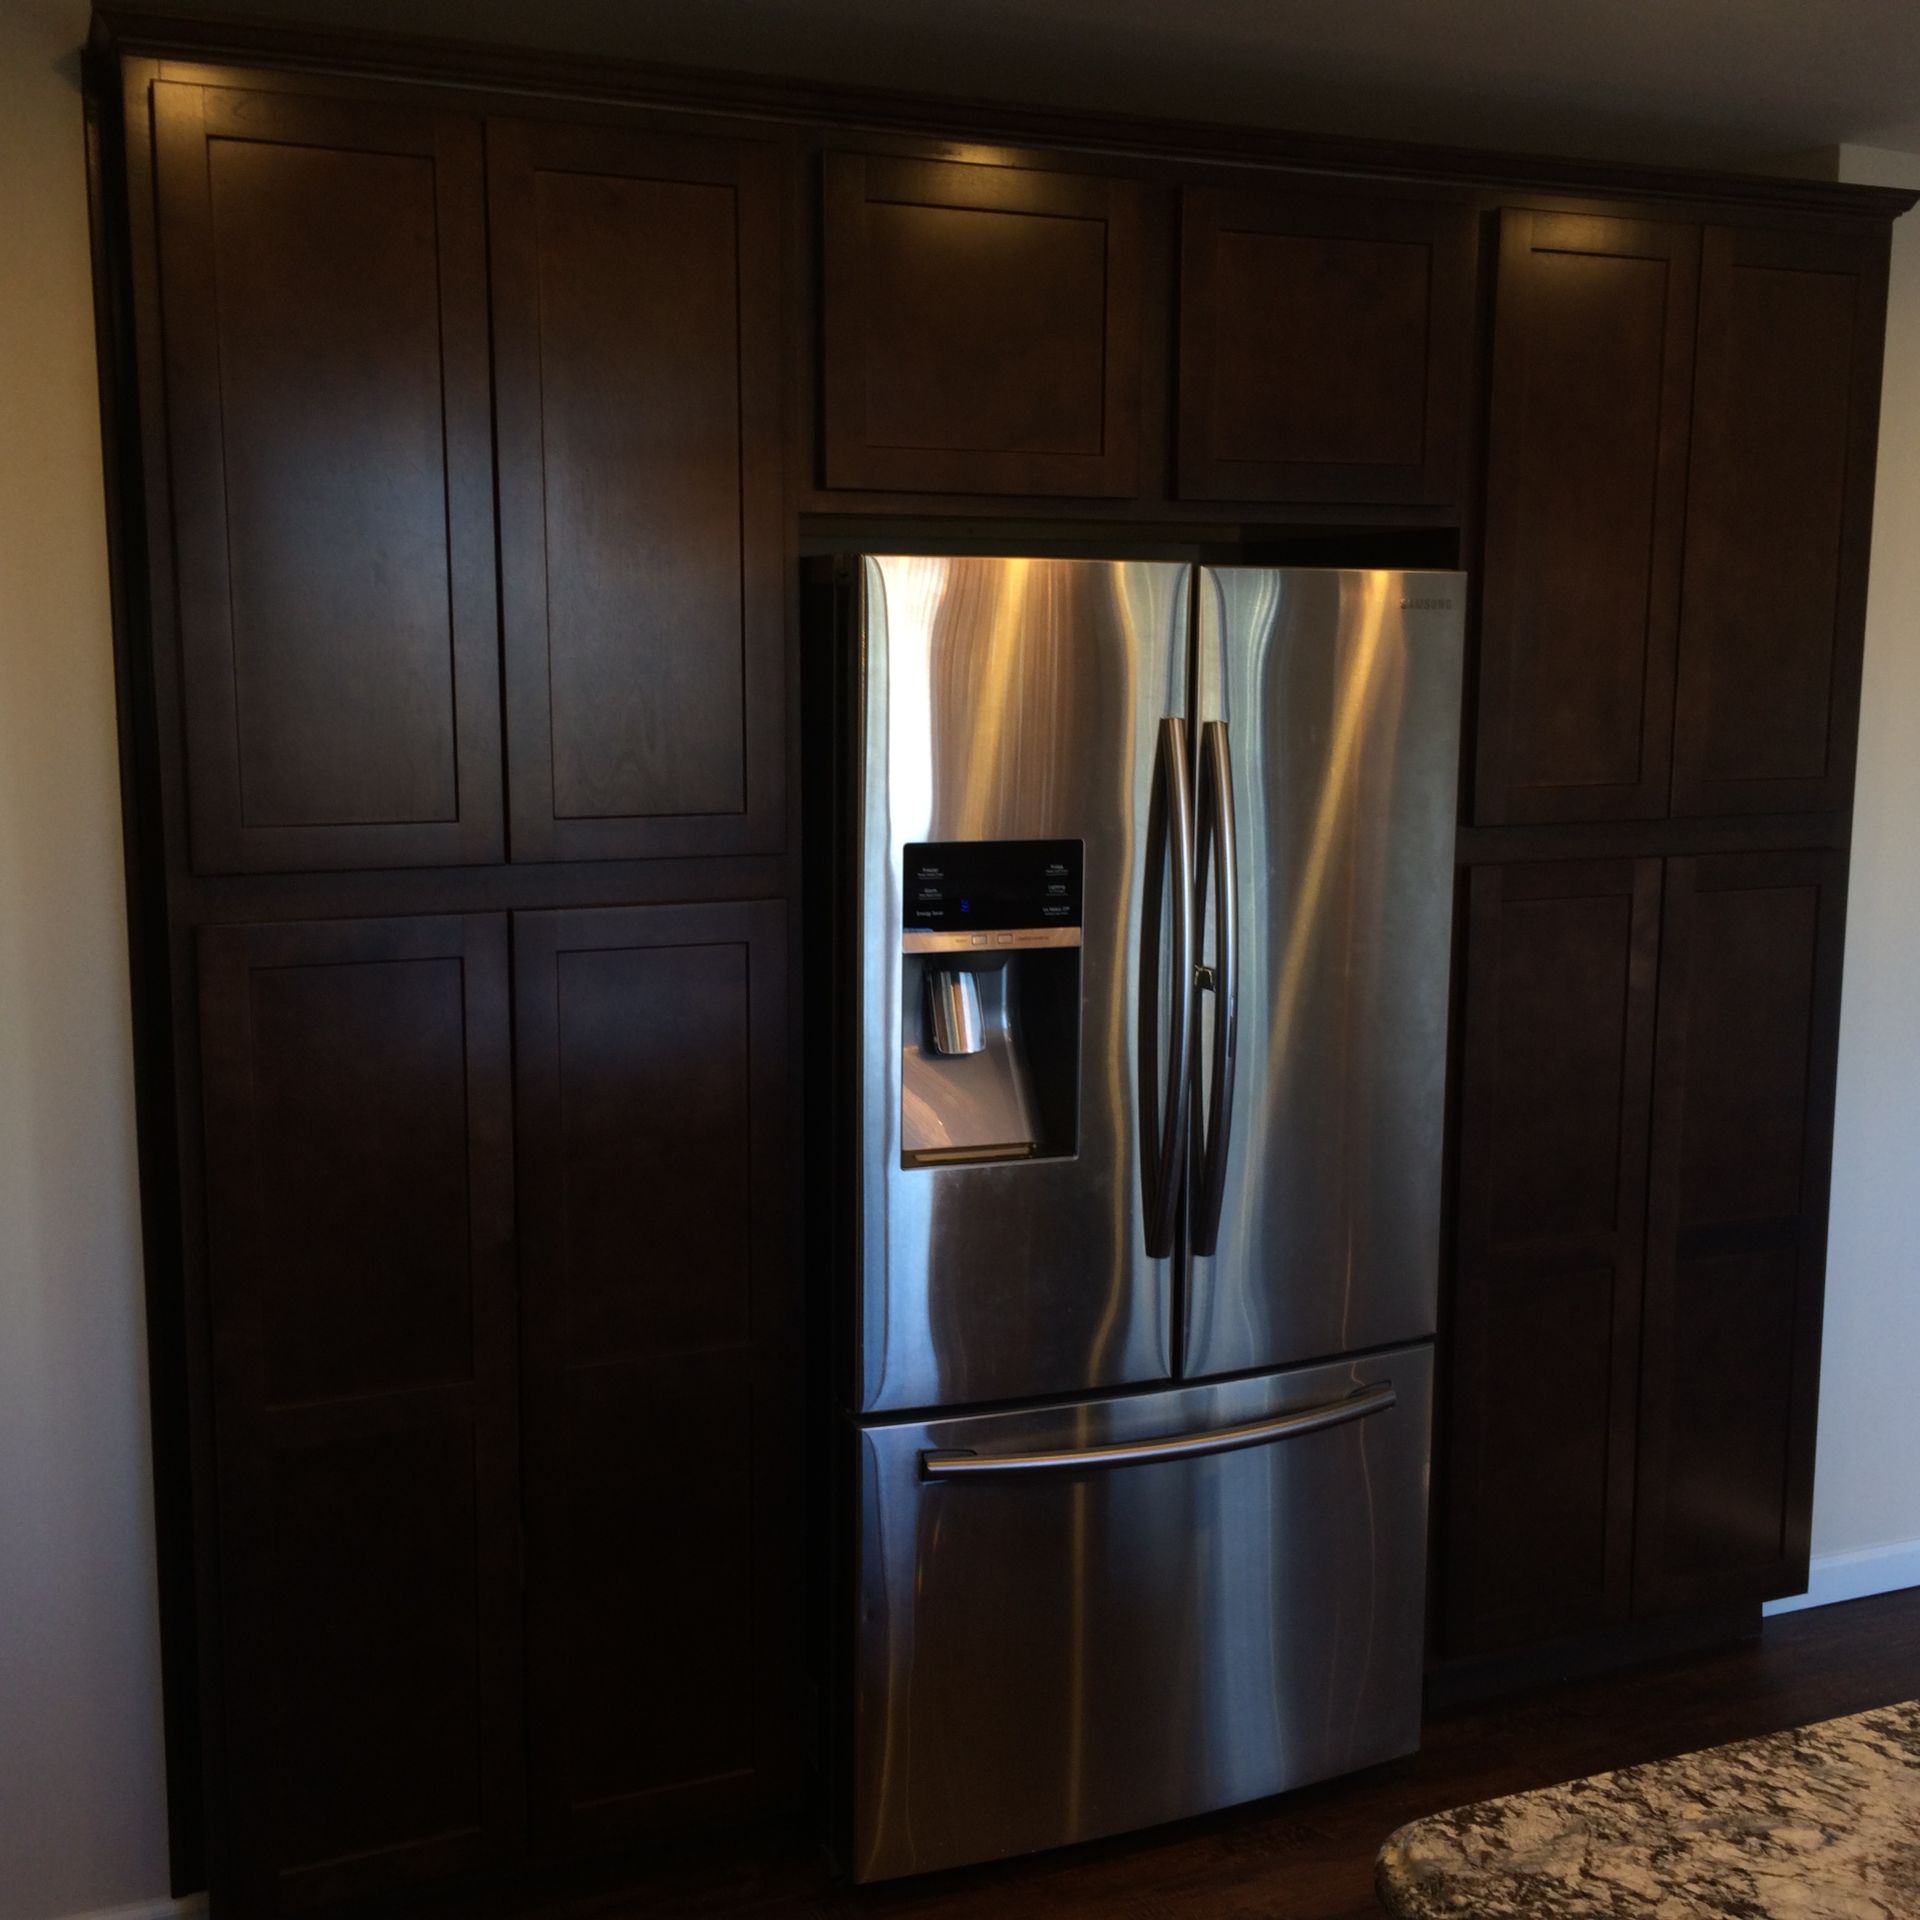 a stainless steel refrigerator in a kitchen with dark wood cabinets